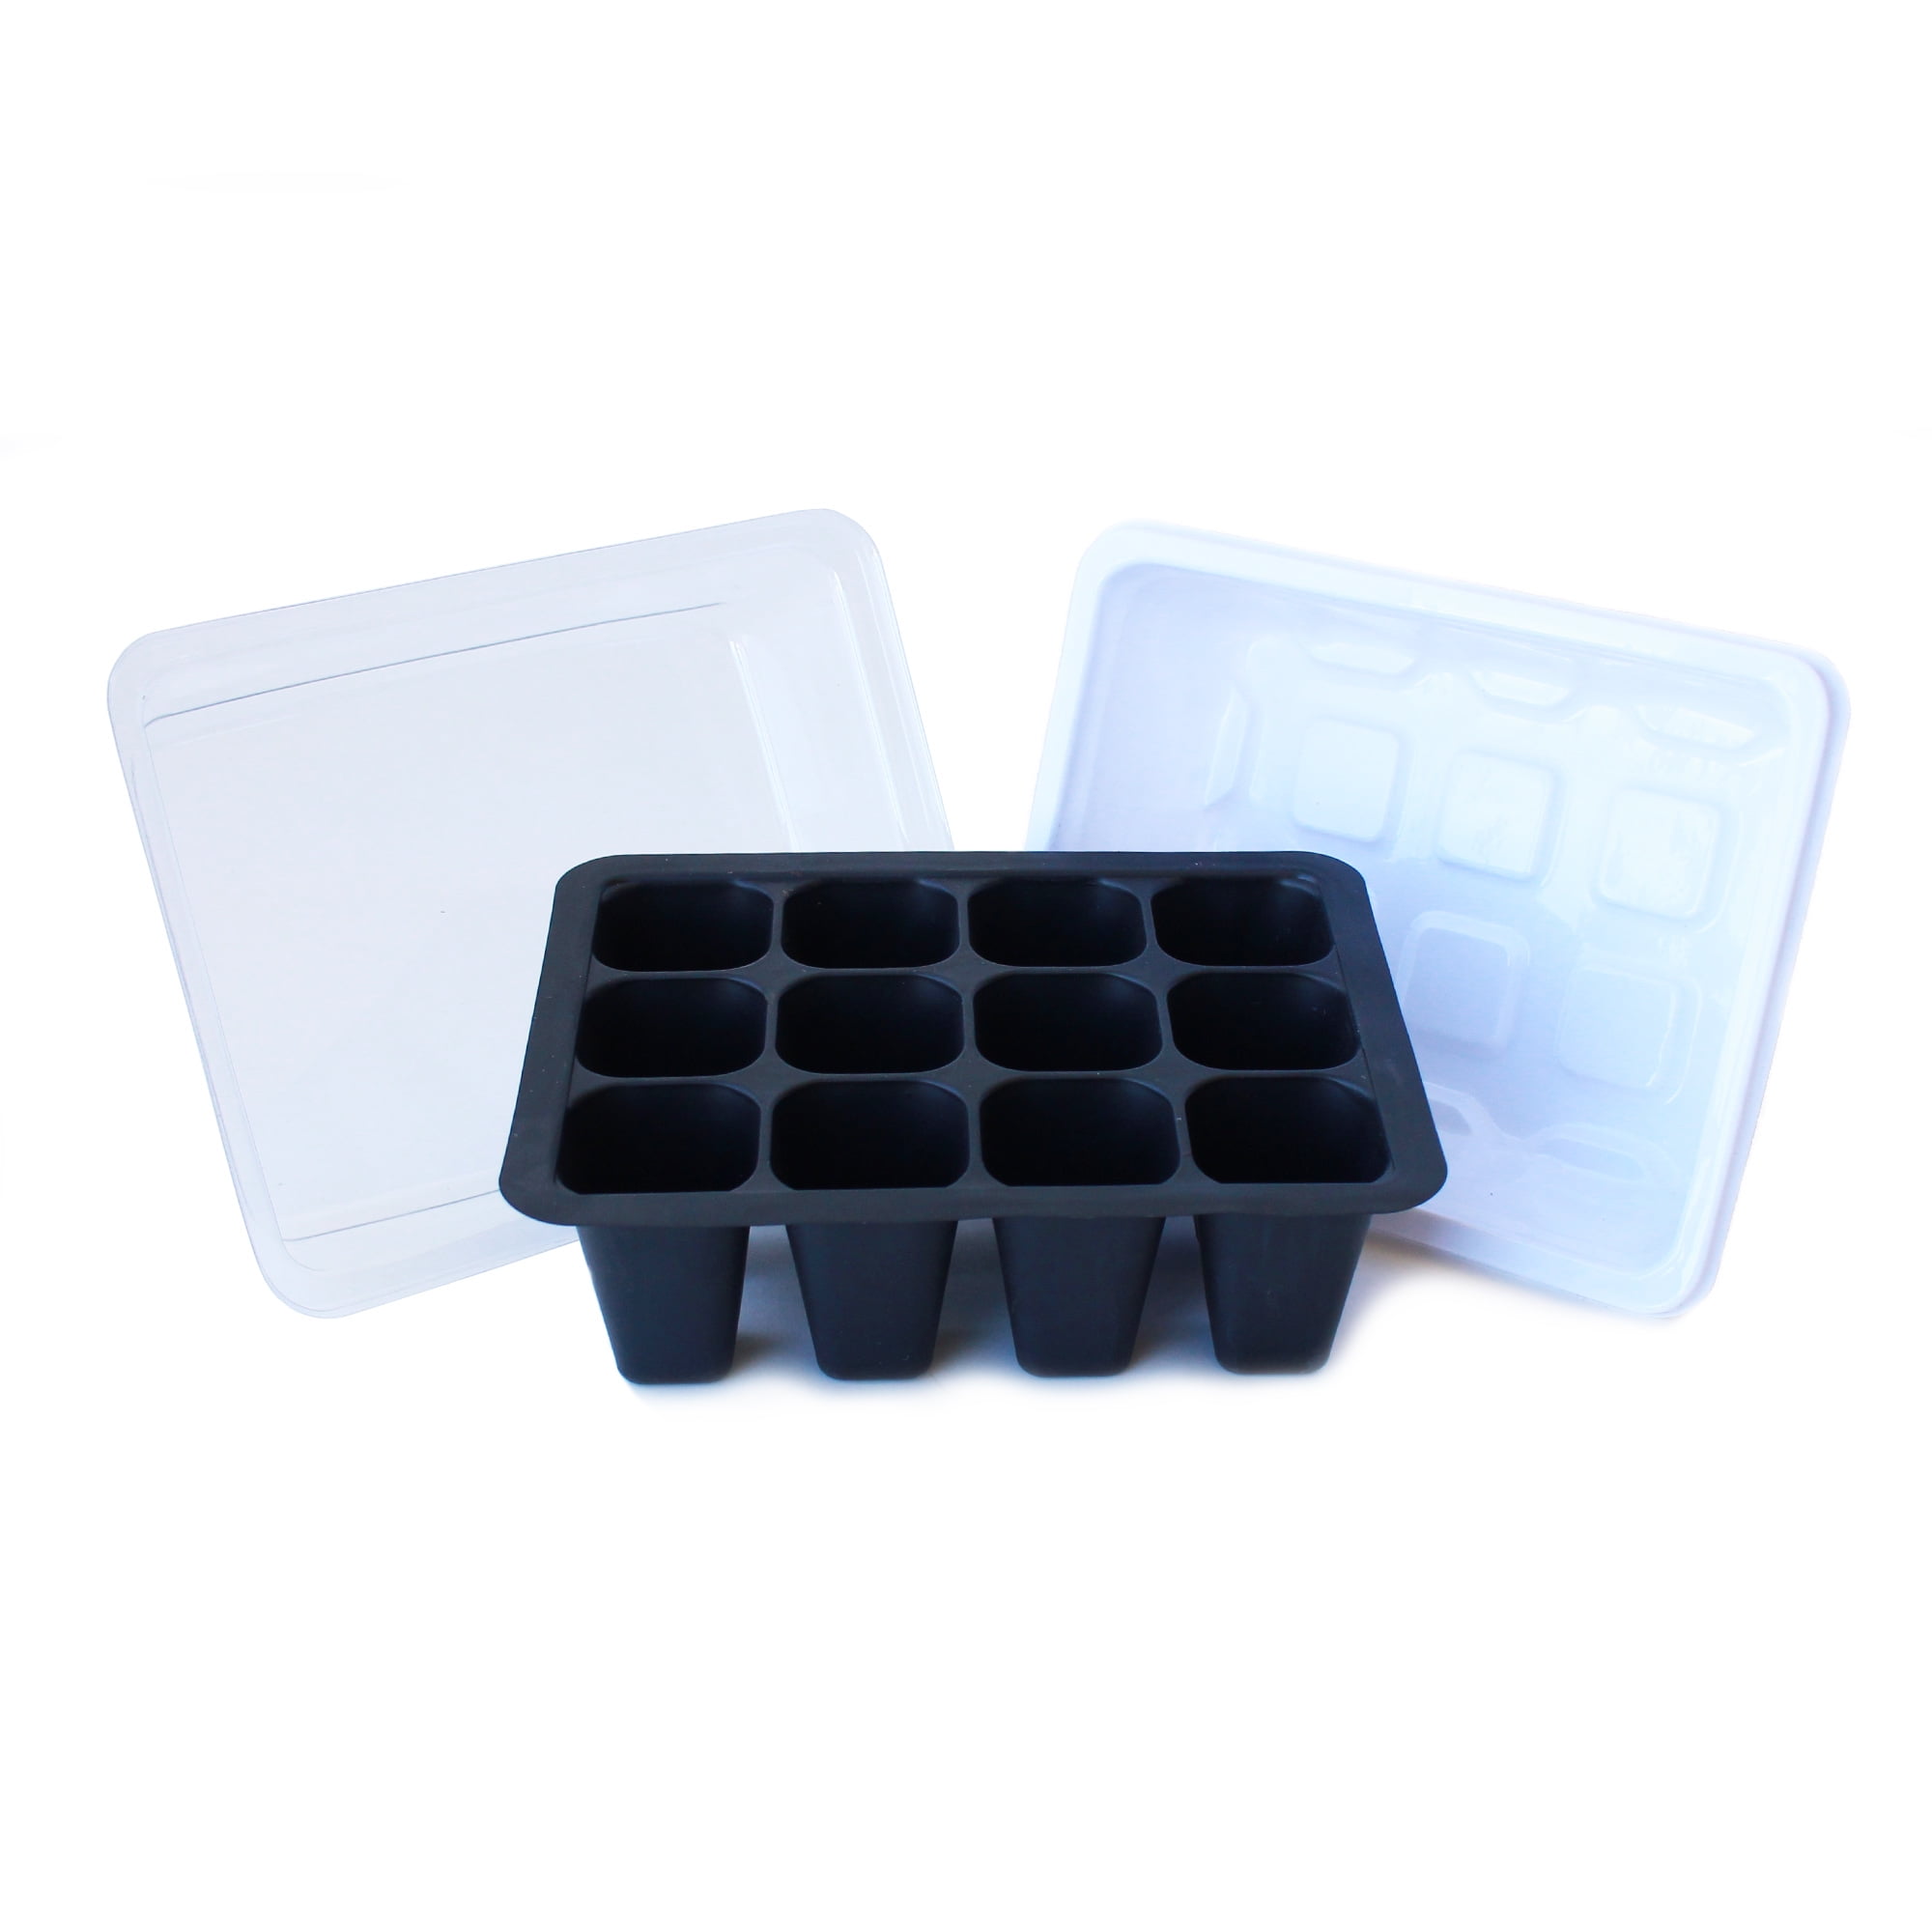 10 X Full Size Propagator Set Lids Seed Trays 40 Cell Inserts With or No Holes 